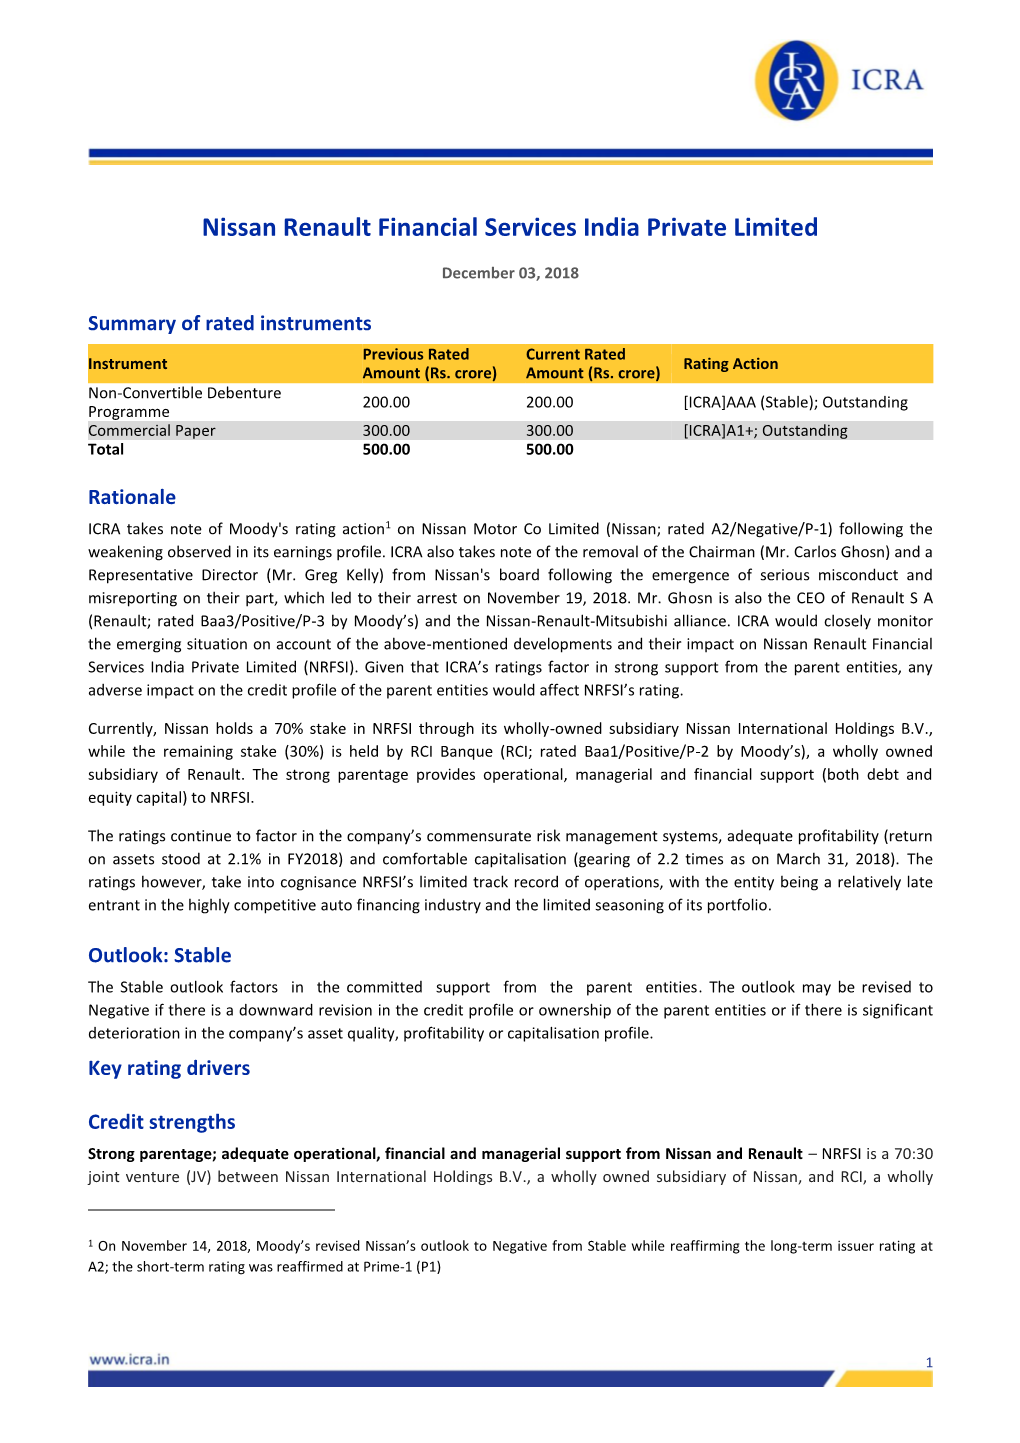 Nissan Renault Financial Services India Private Limited